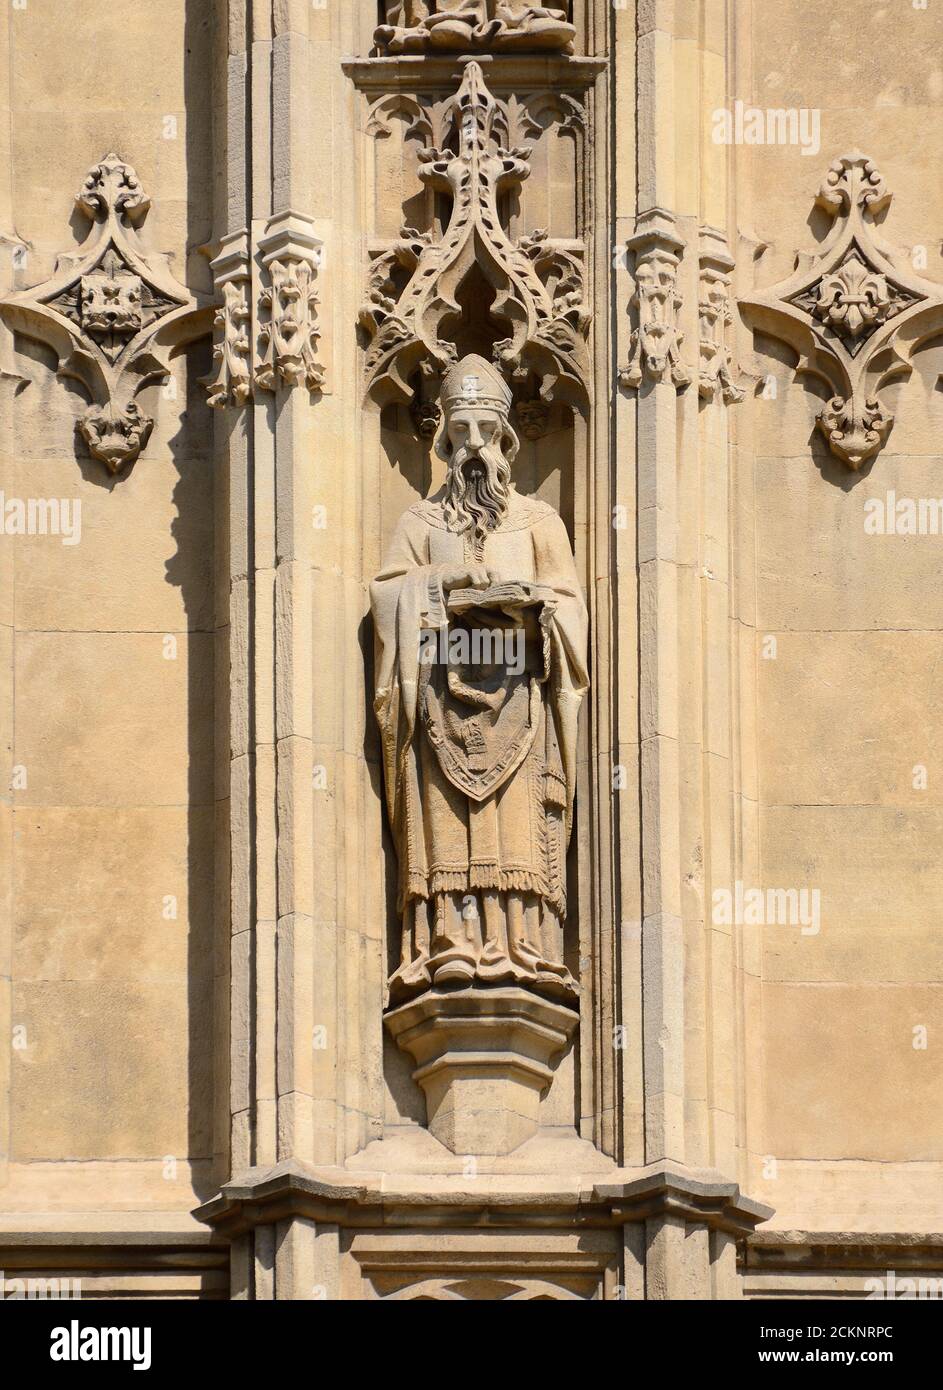 London, England, UK. Statue of St David on the Southern facade of the Palace of Westminster Stock Photo